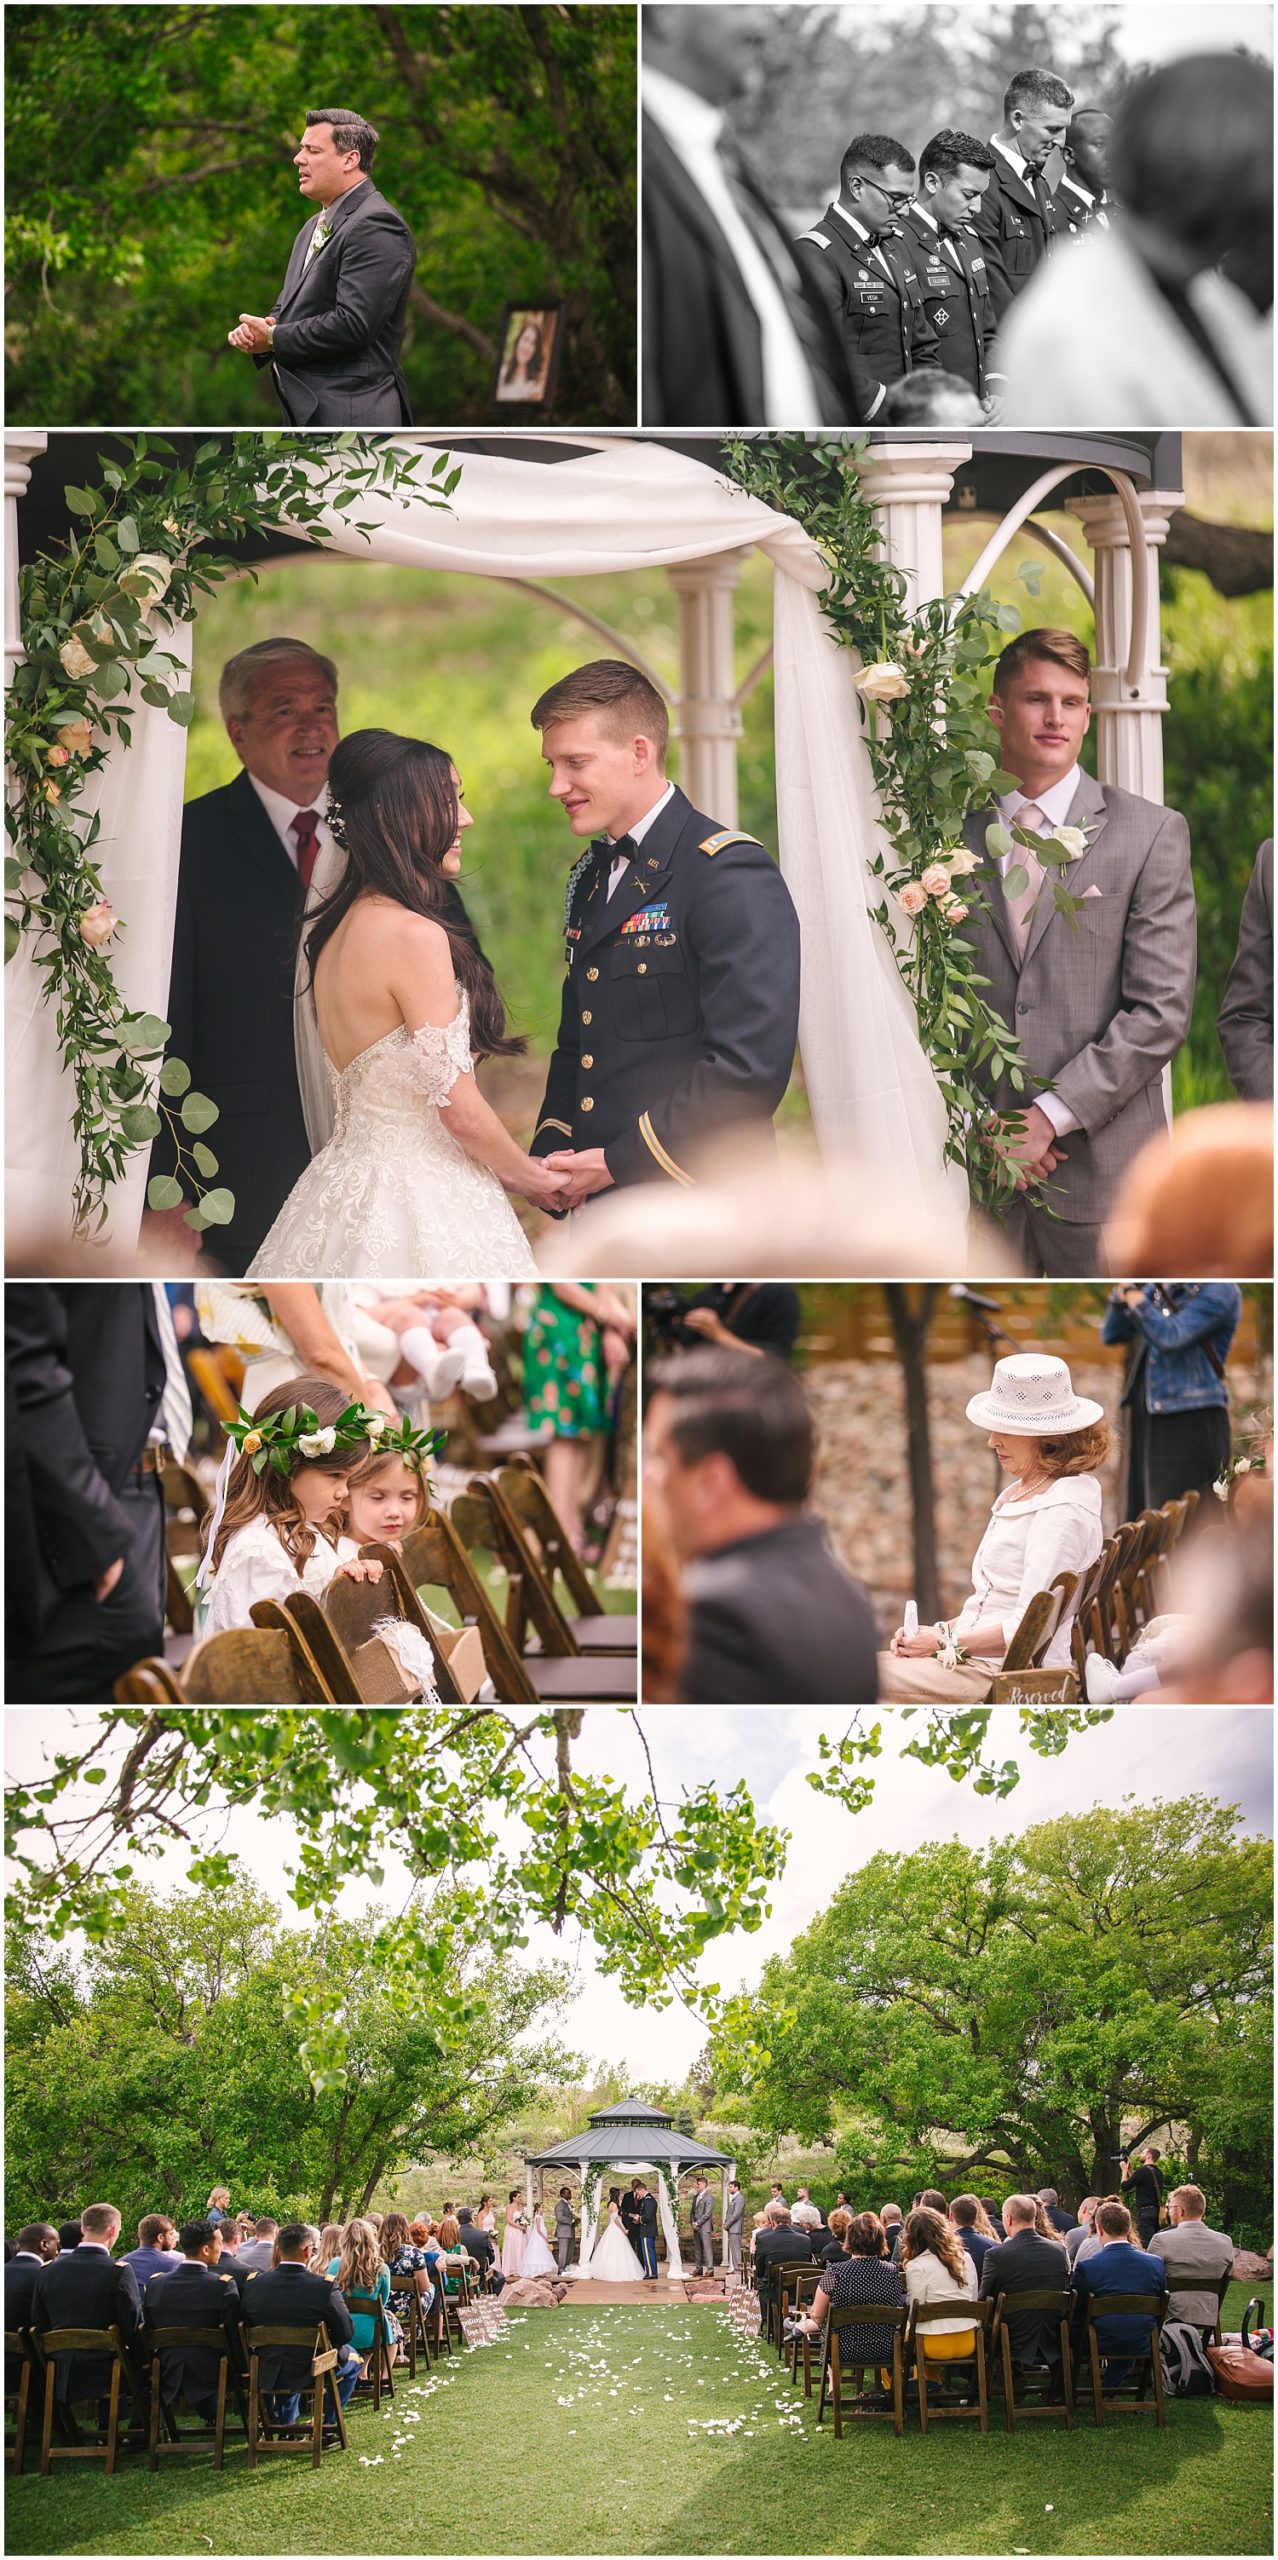 Outdoor wedding ceremony on the lawn at Creekside Event Center in Colorado Springs